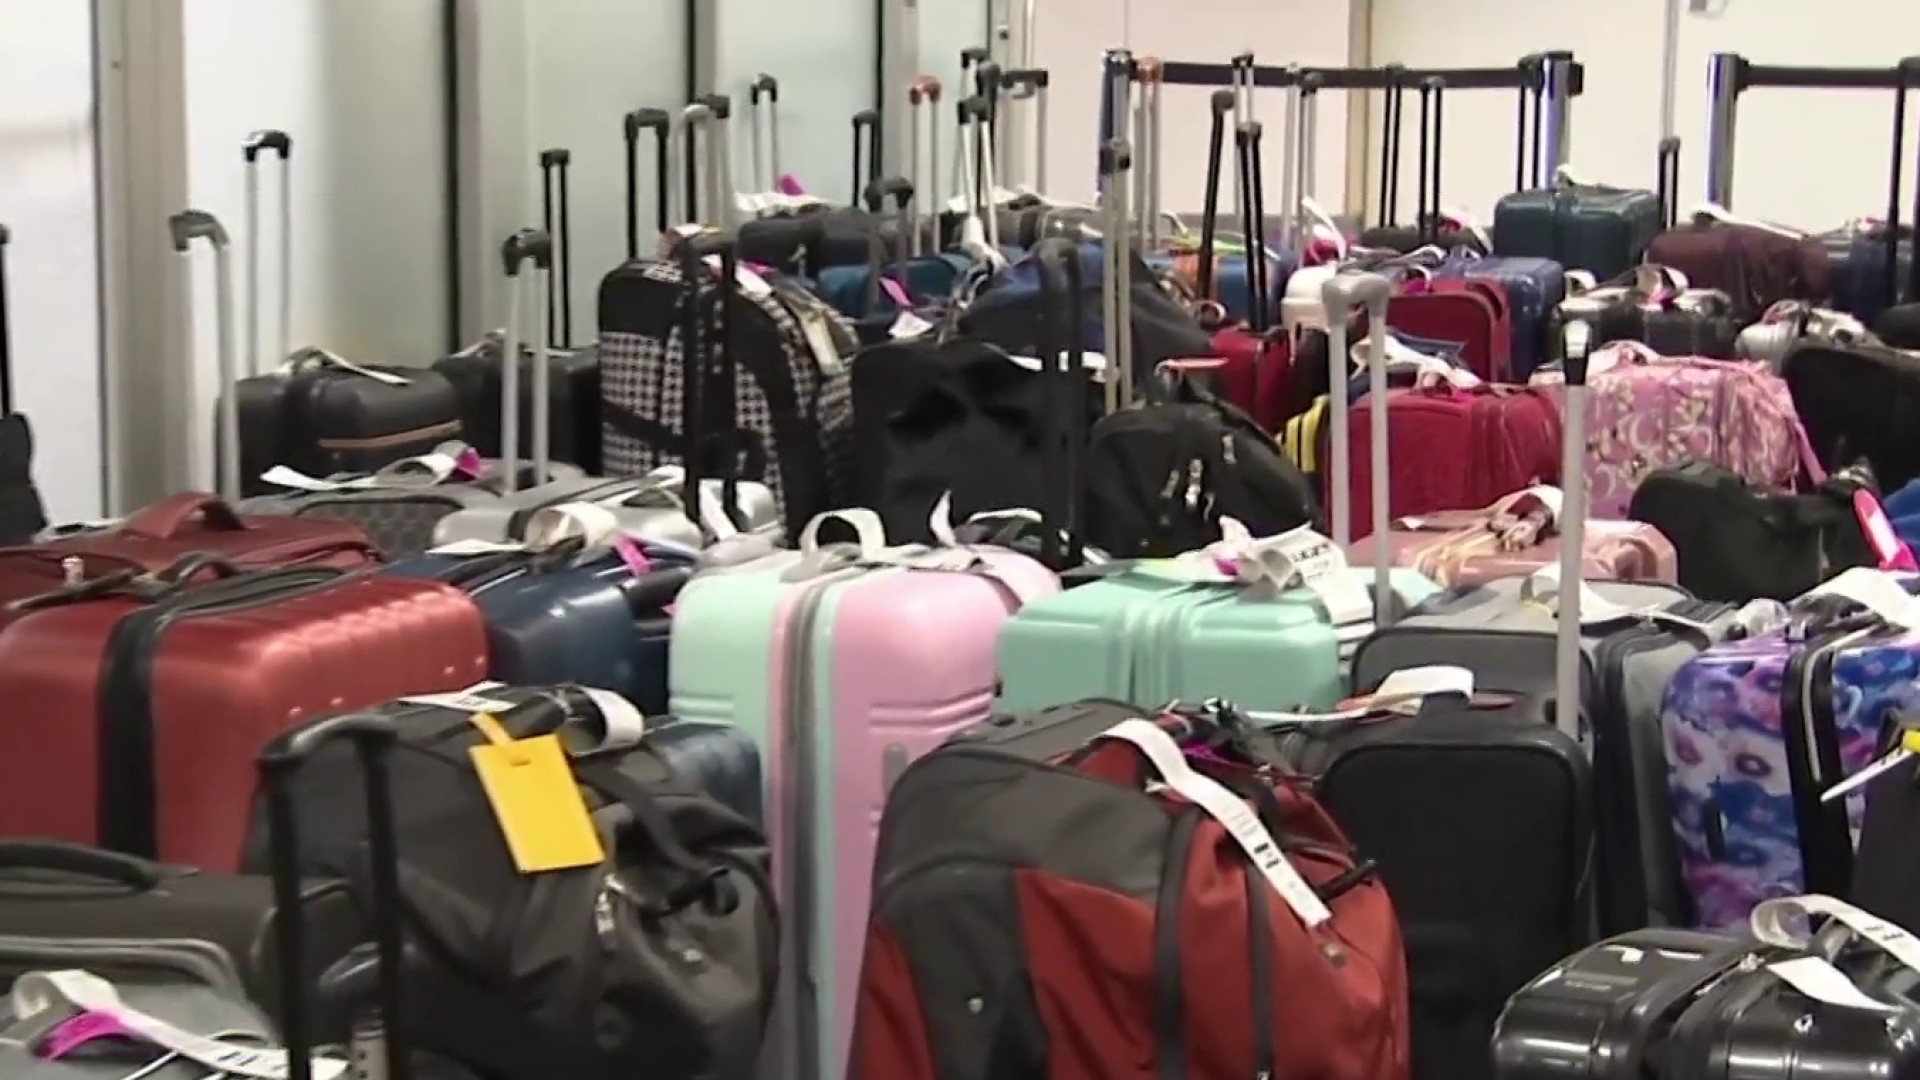 Land of lost luggage: This online shop sells items found in unclaimed bags  at airport